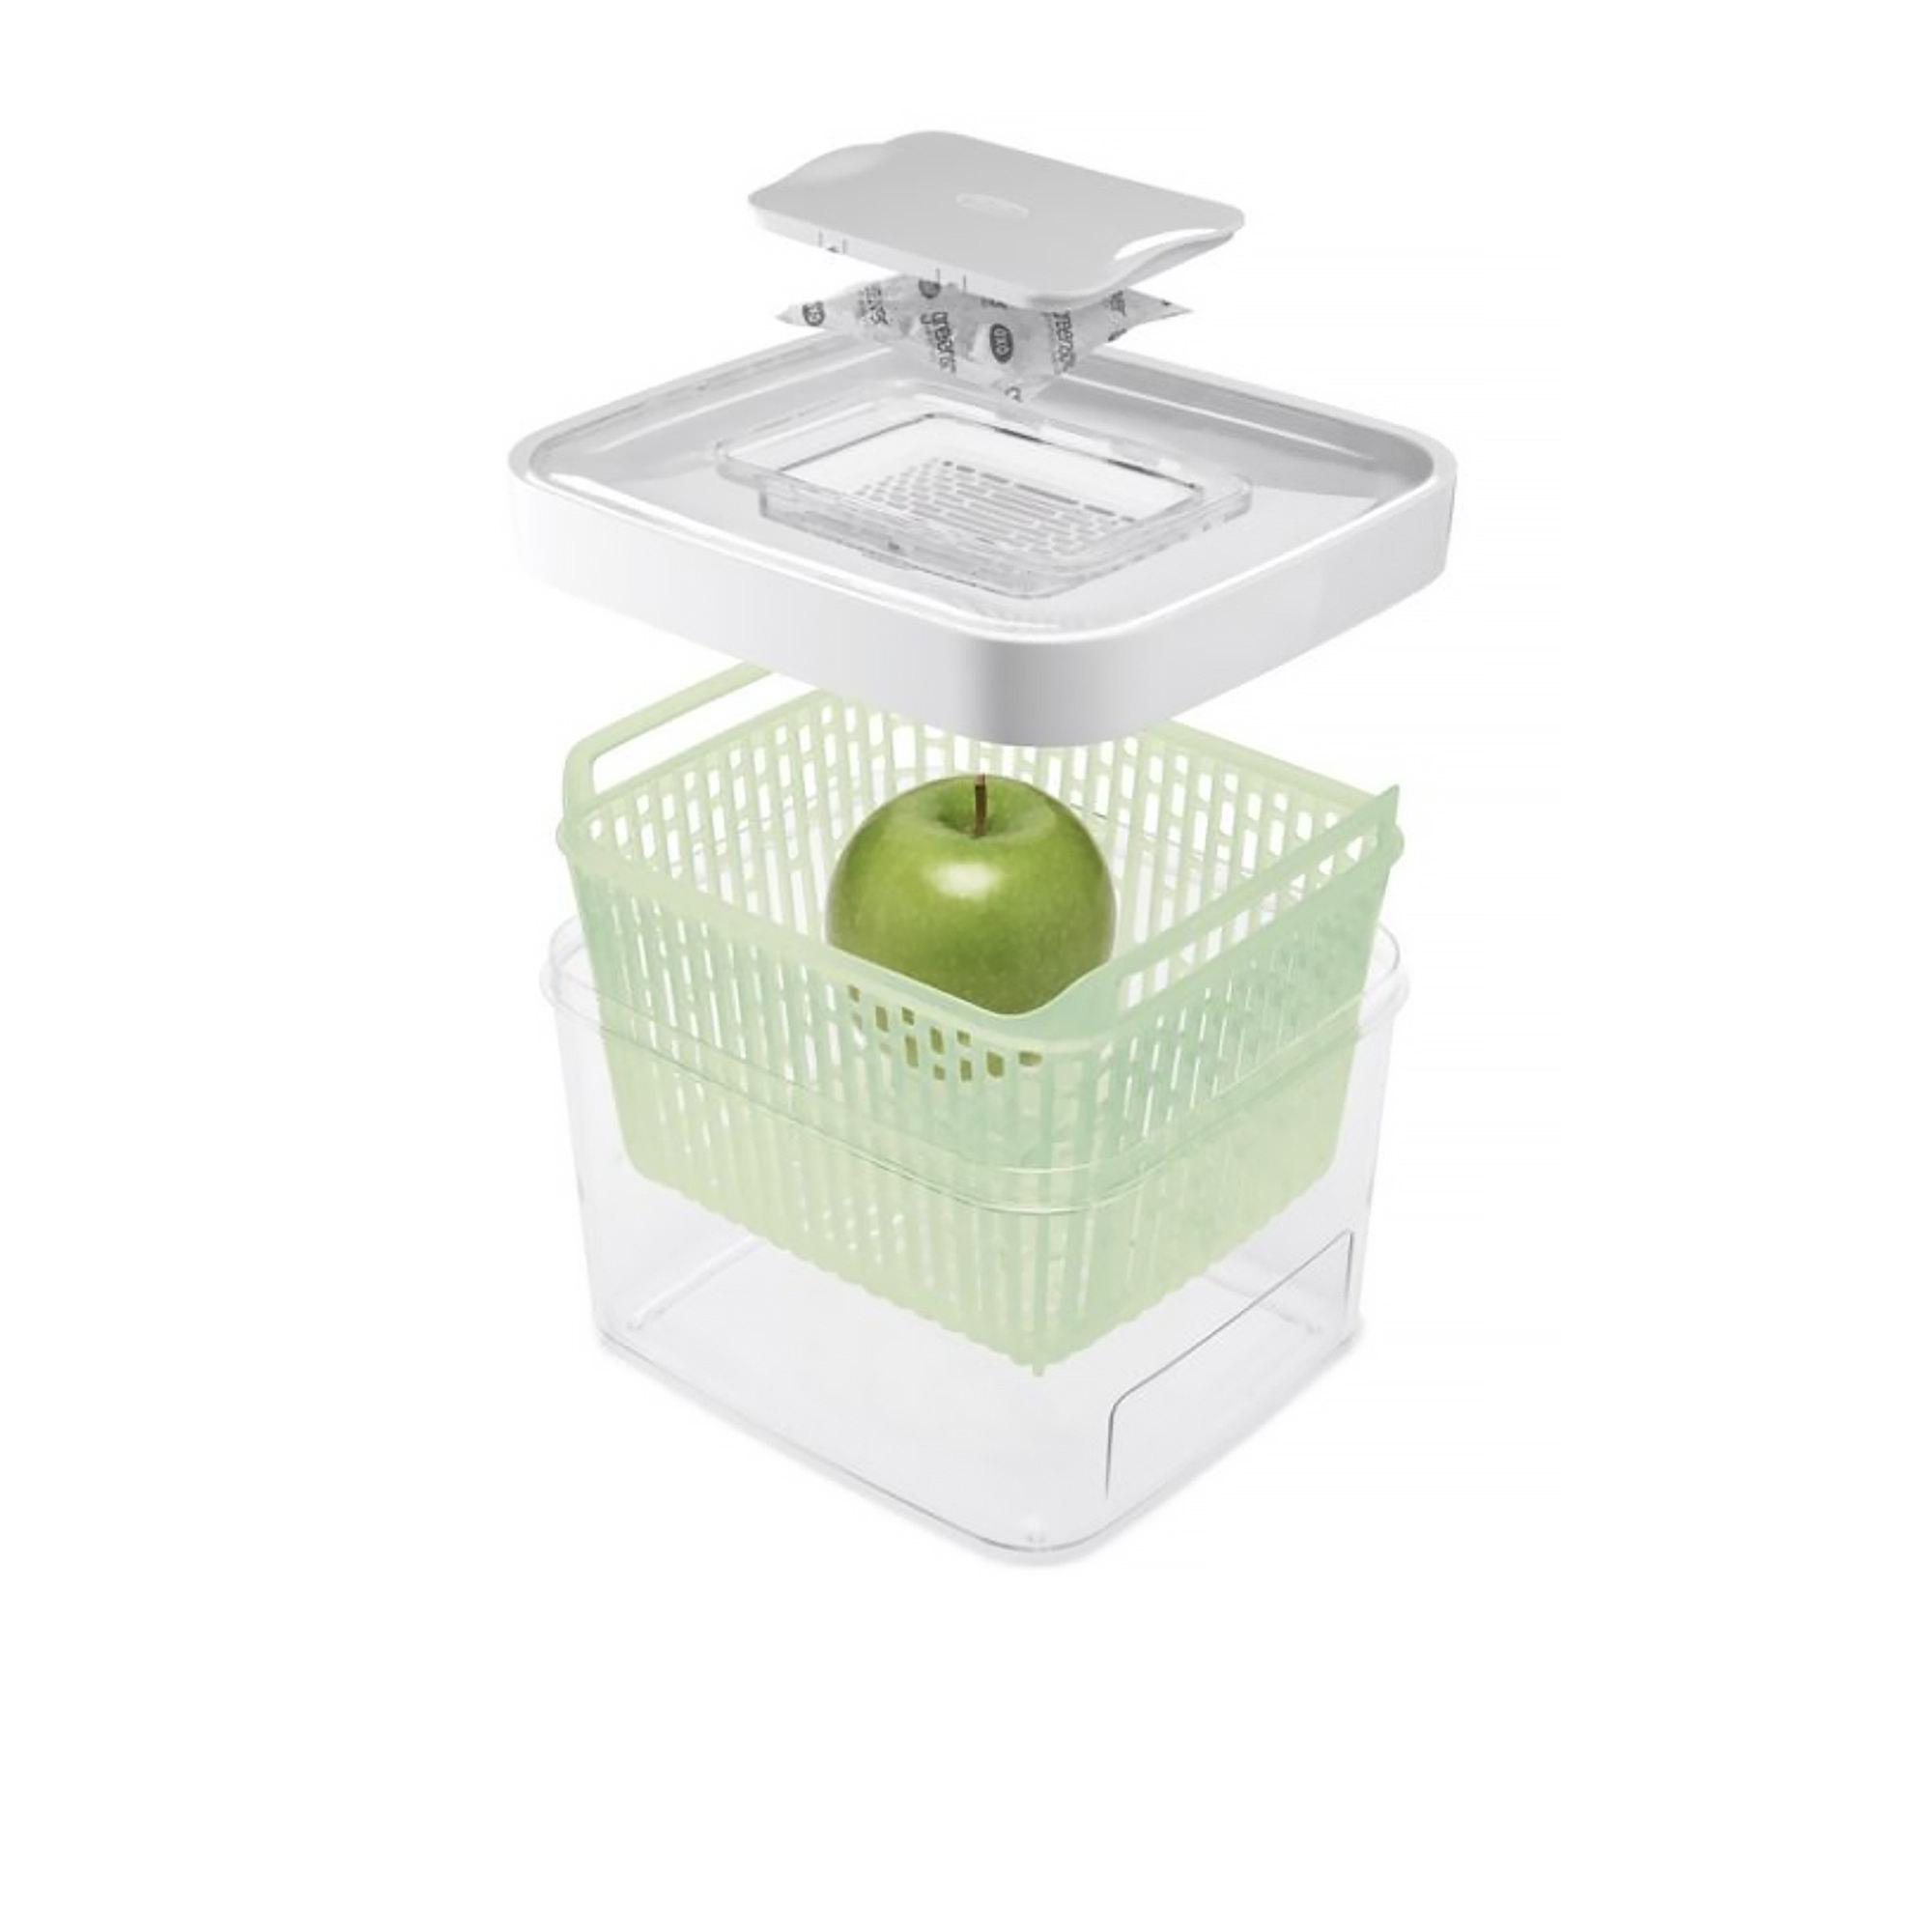 OXO Good Grips GreenSaver Produce Keeper 4L Image 5